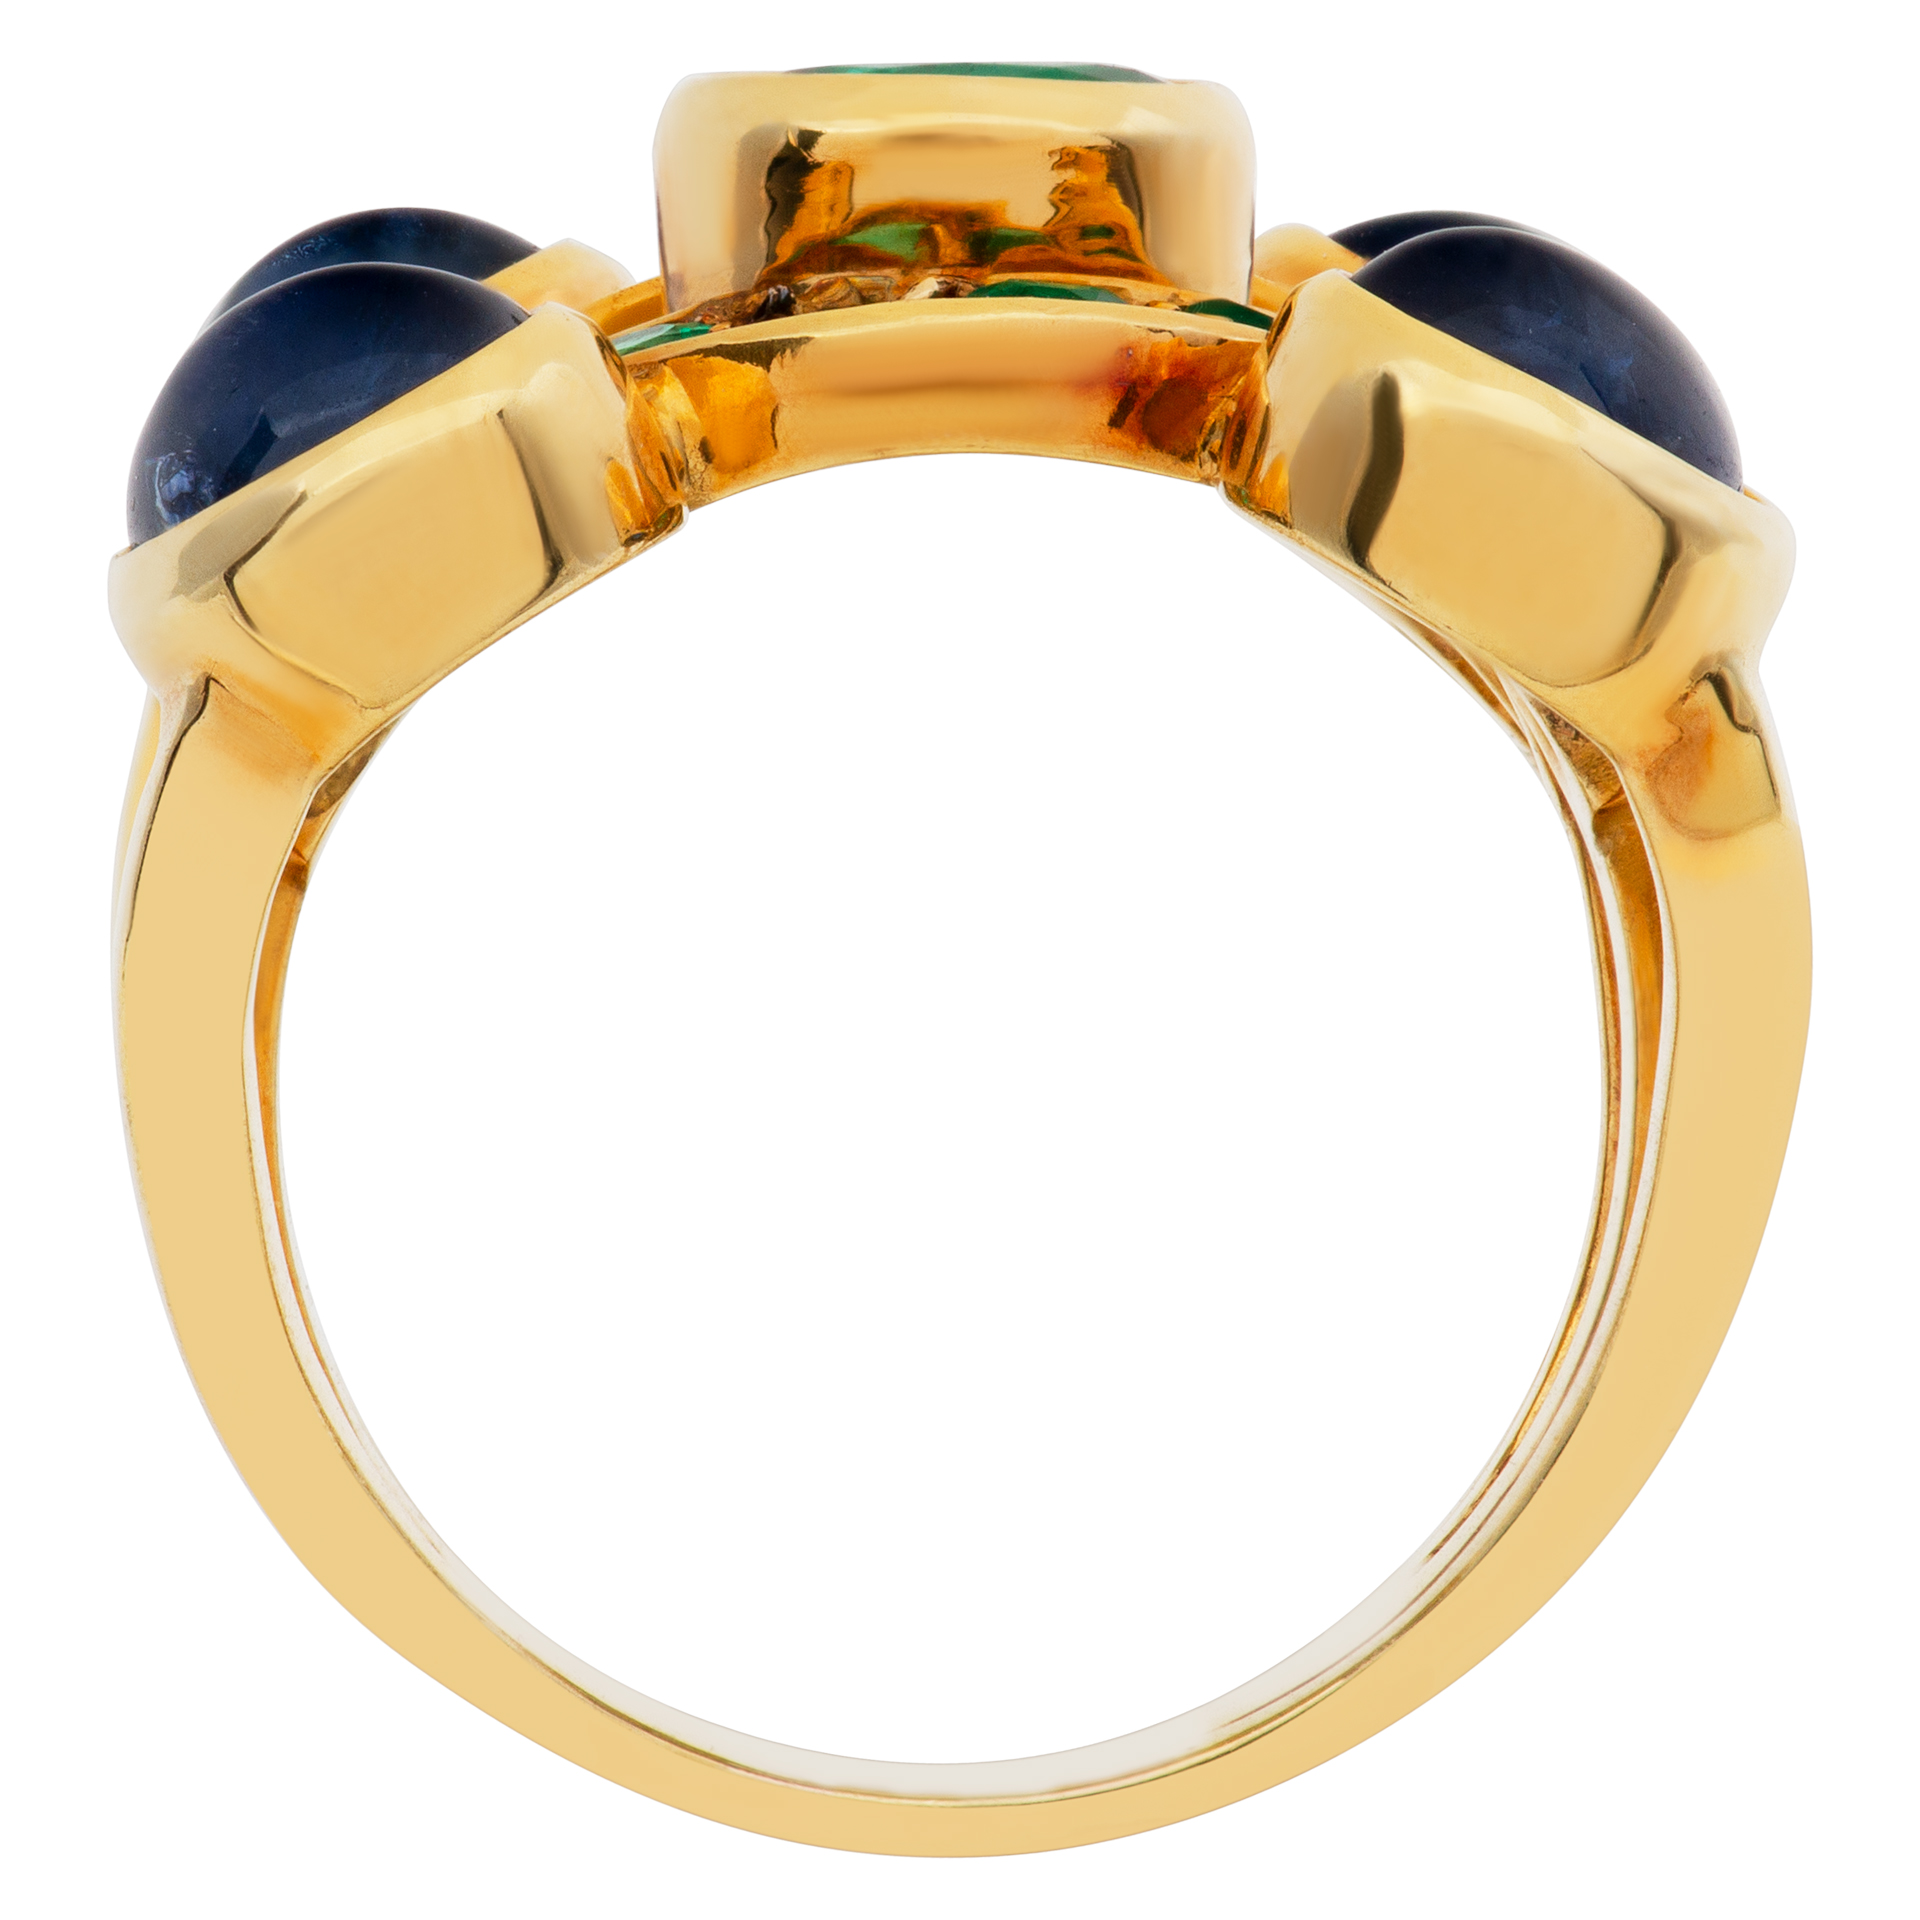 Brilliant oval and round cut Emeralds, cabochon sapphires ring set in 18k yellow gold. image 4